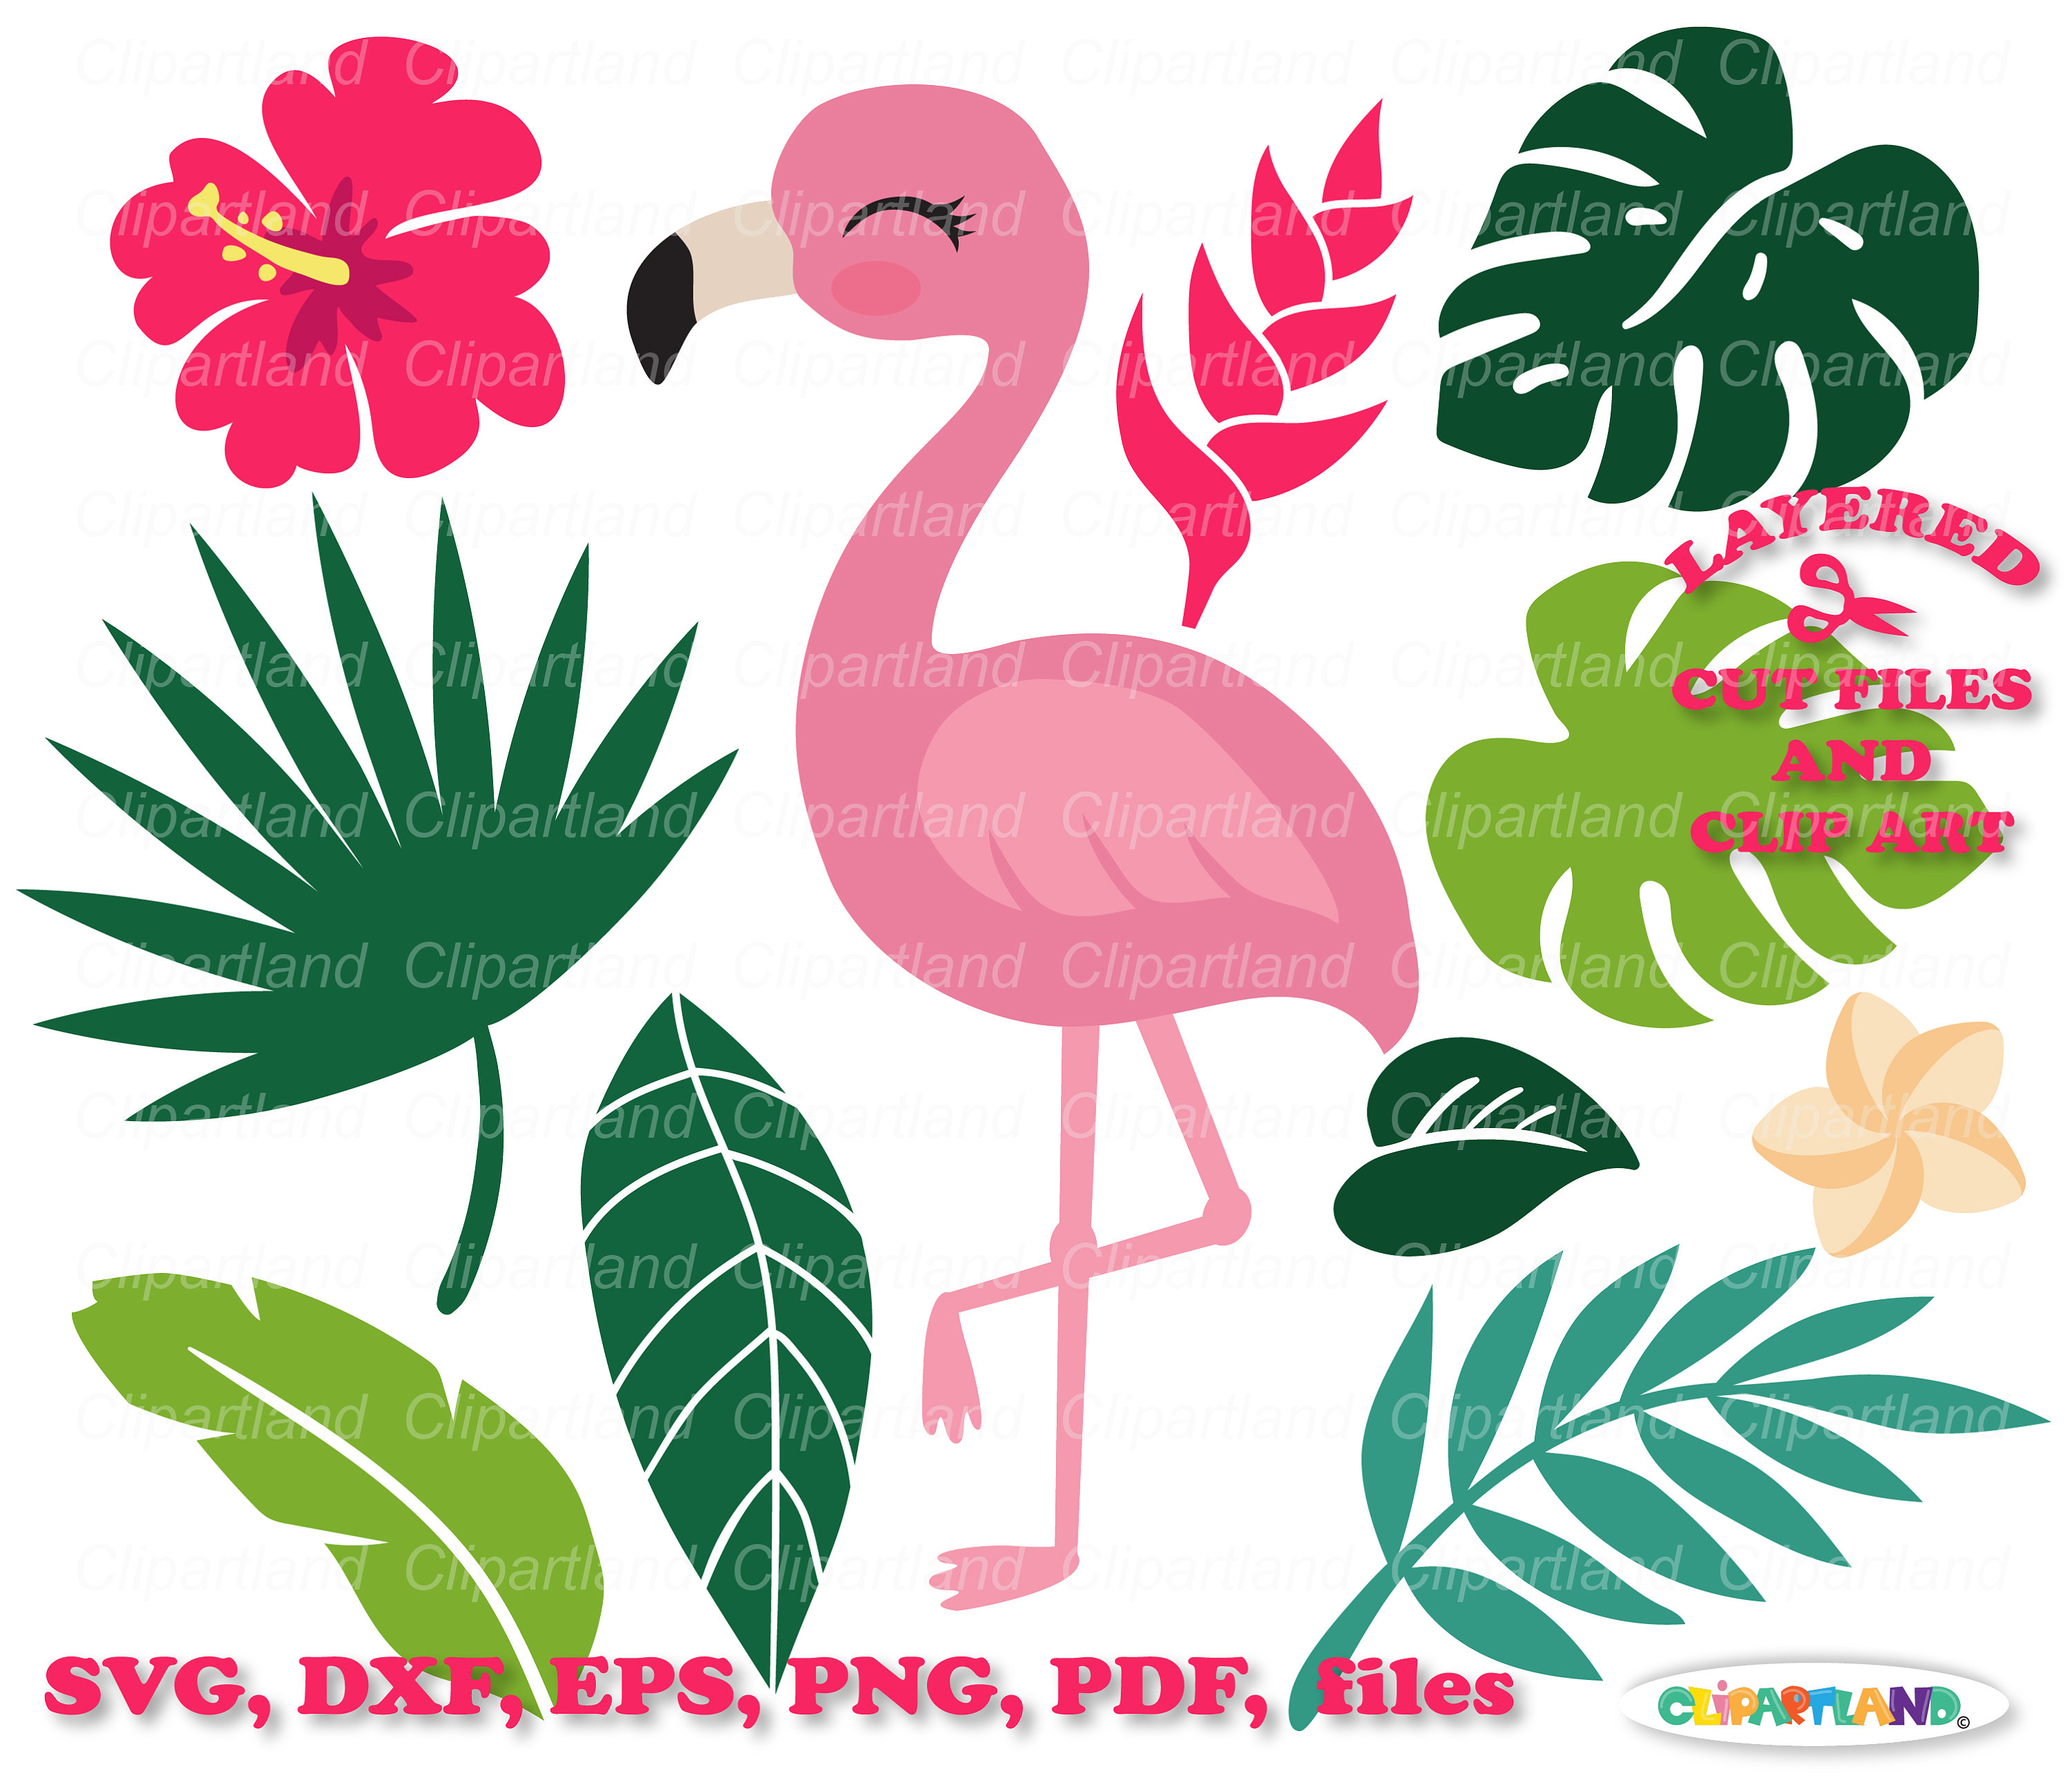 Flamingo With Tropical Leaves T-shirt Design Vector Download